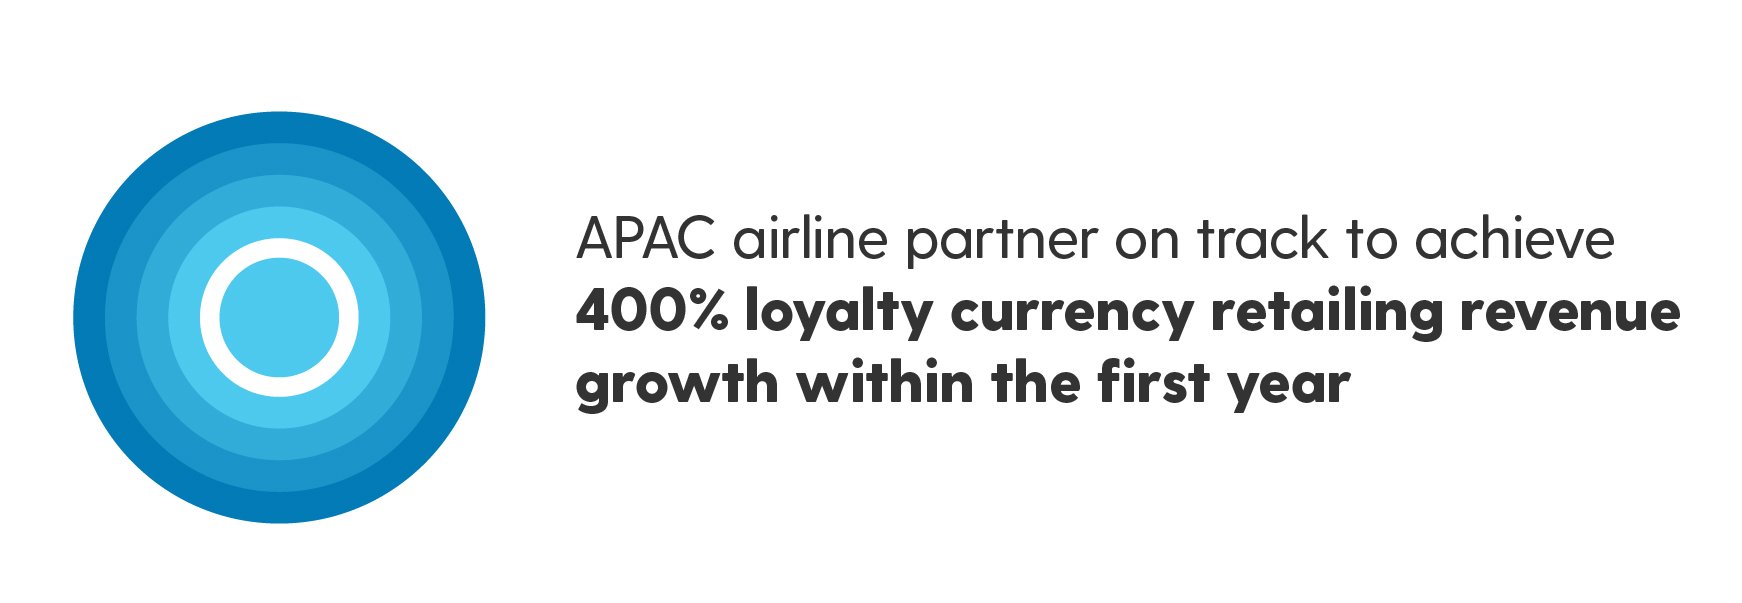 APAC airline partner on track to achieve 400% loyalty currency retailing revenue growth within the first year